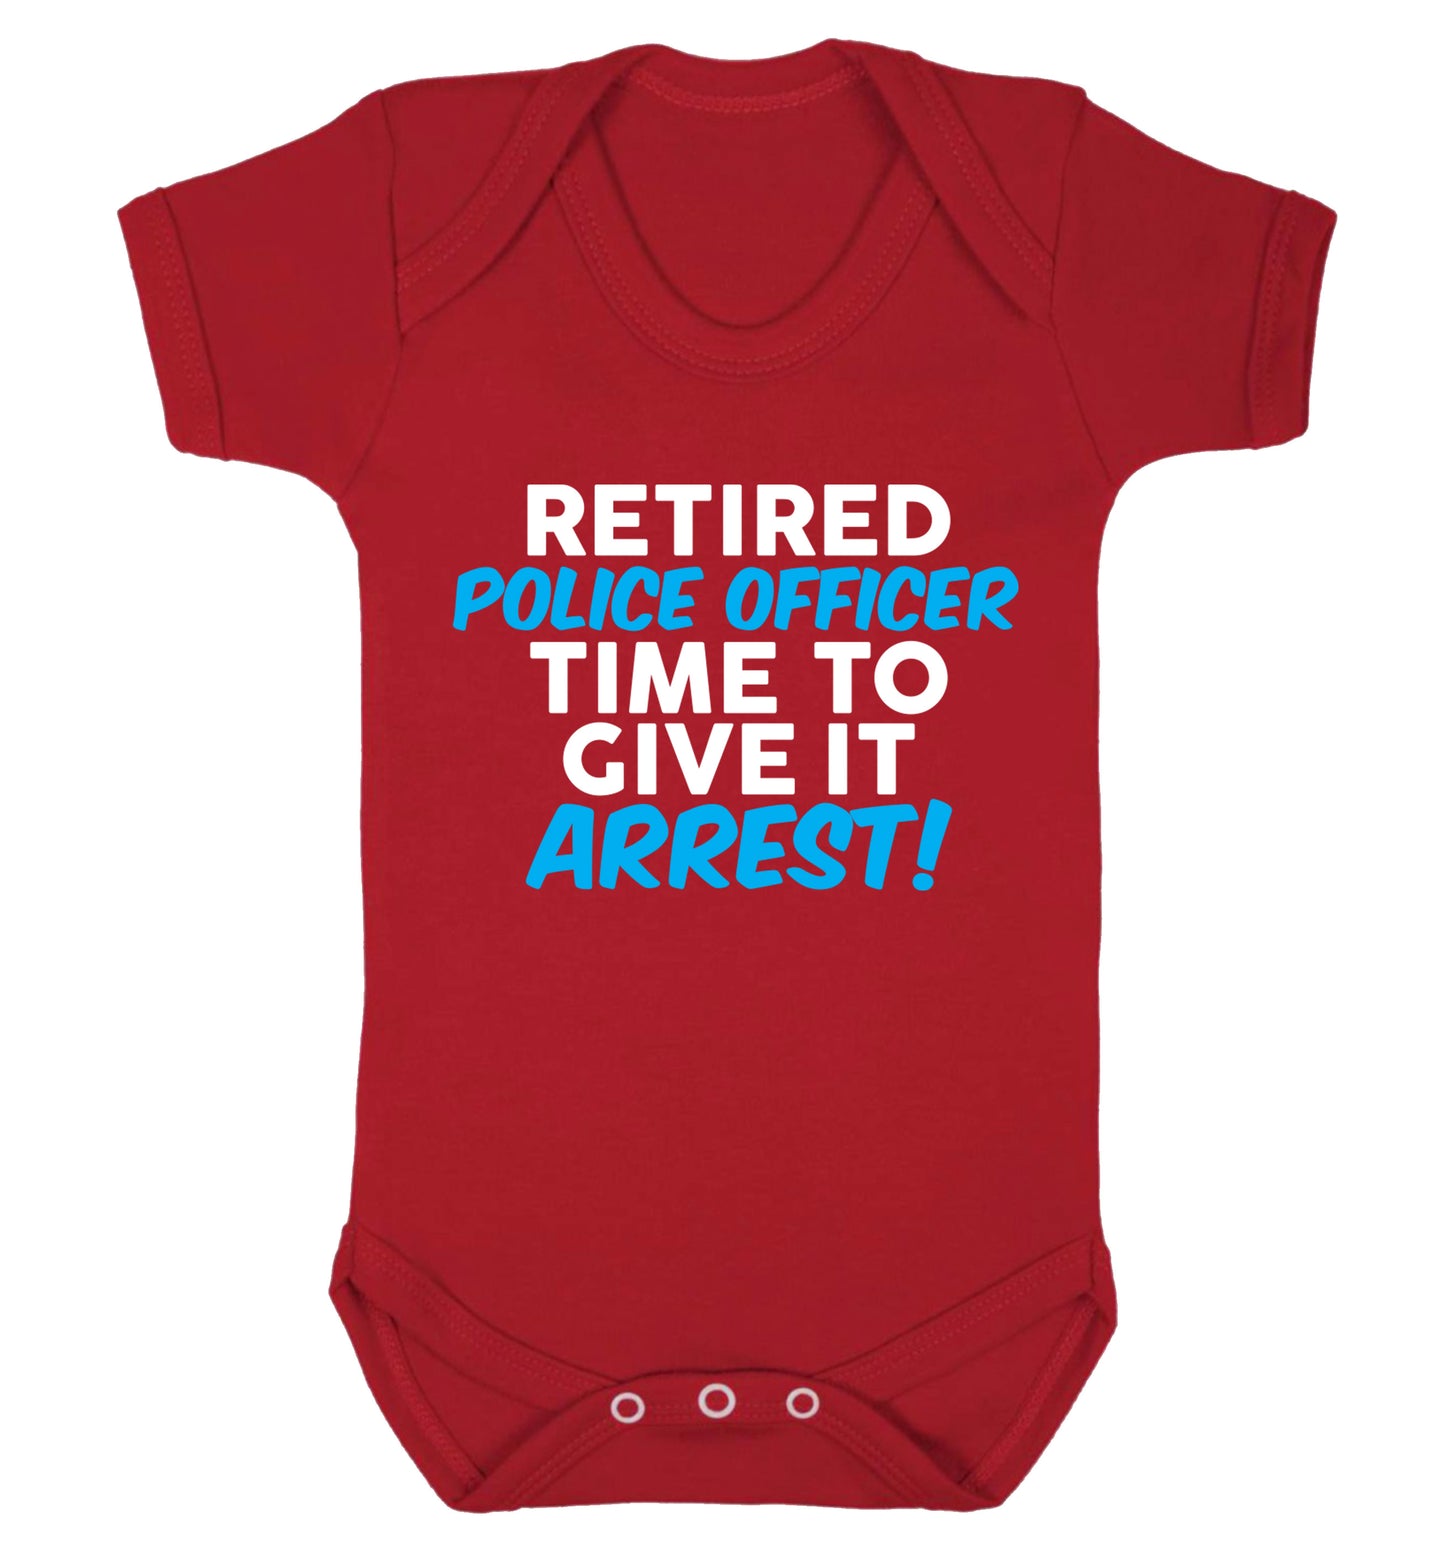 Retired police officer time to give it arrest Baby Vest red 18-24 months